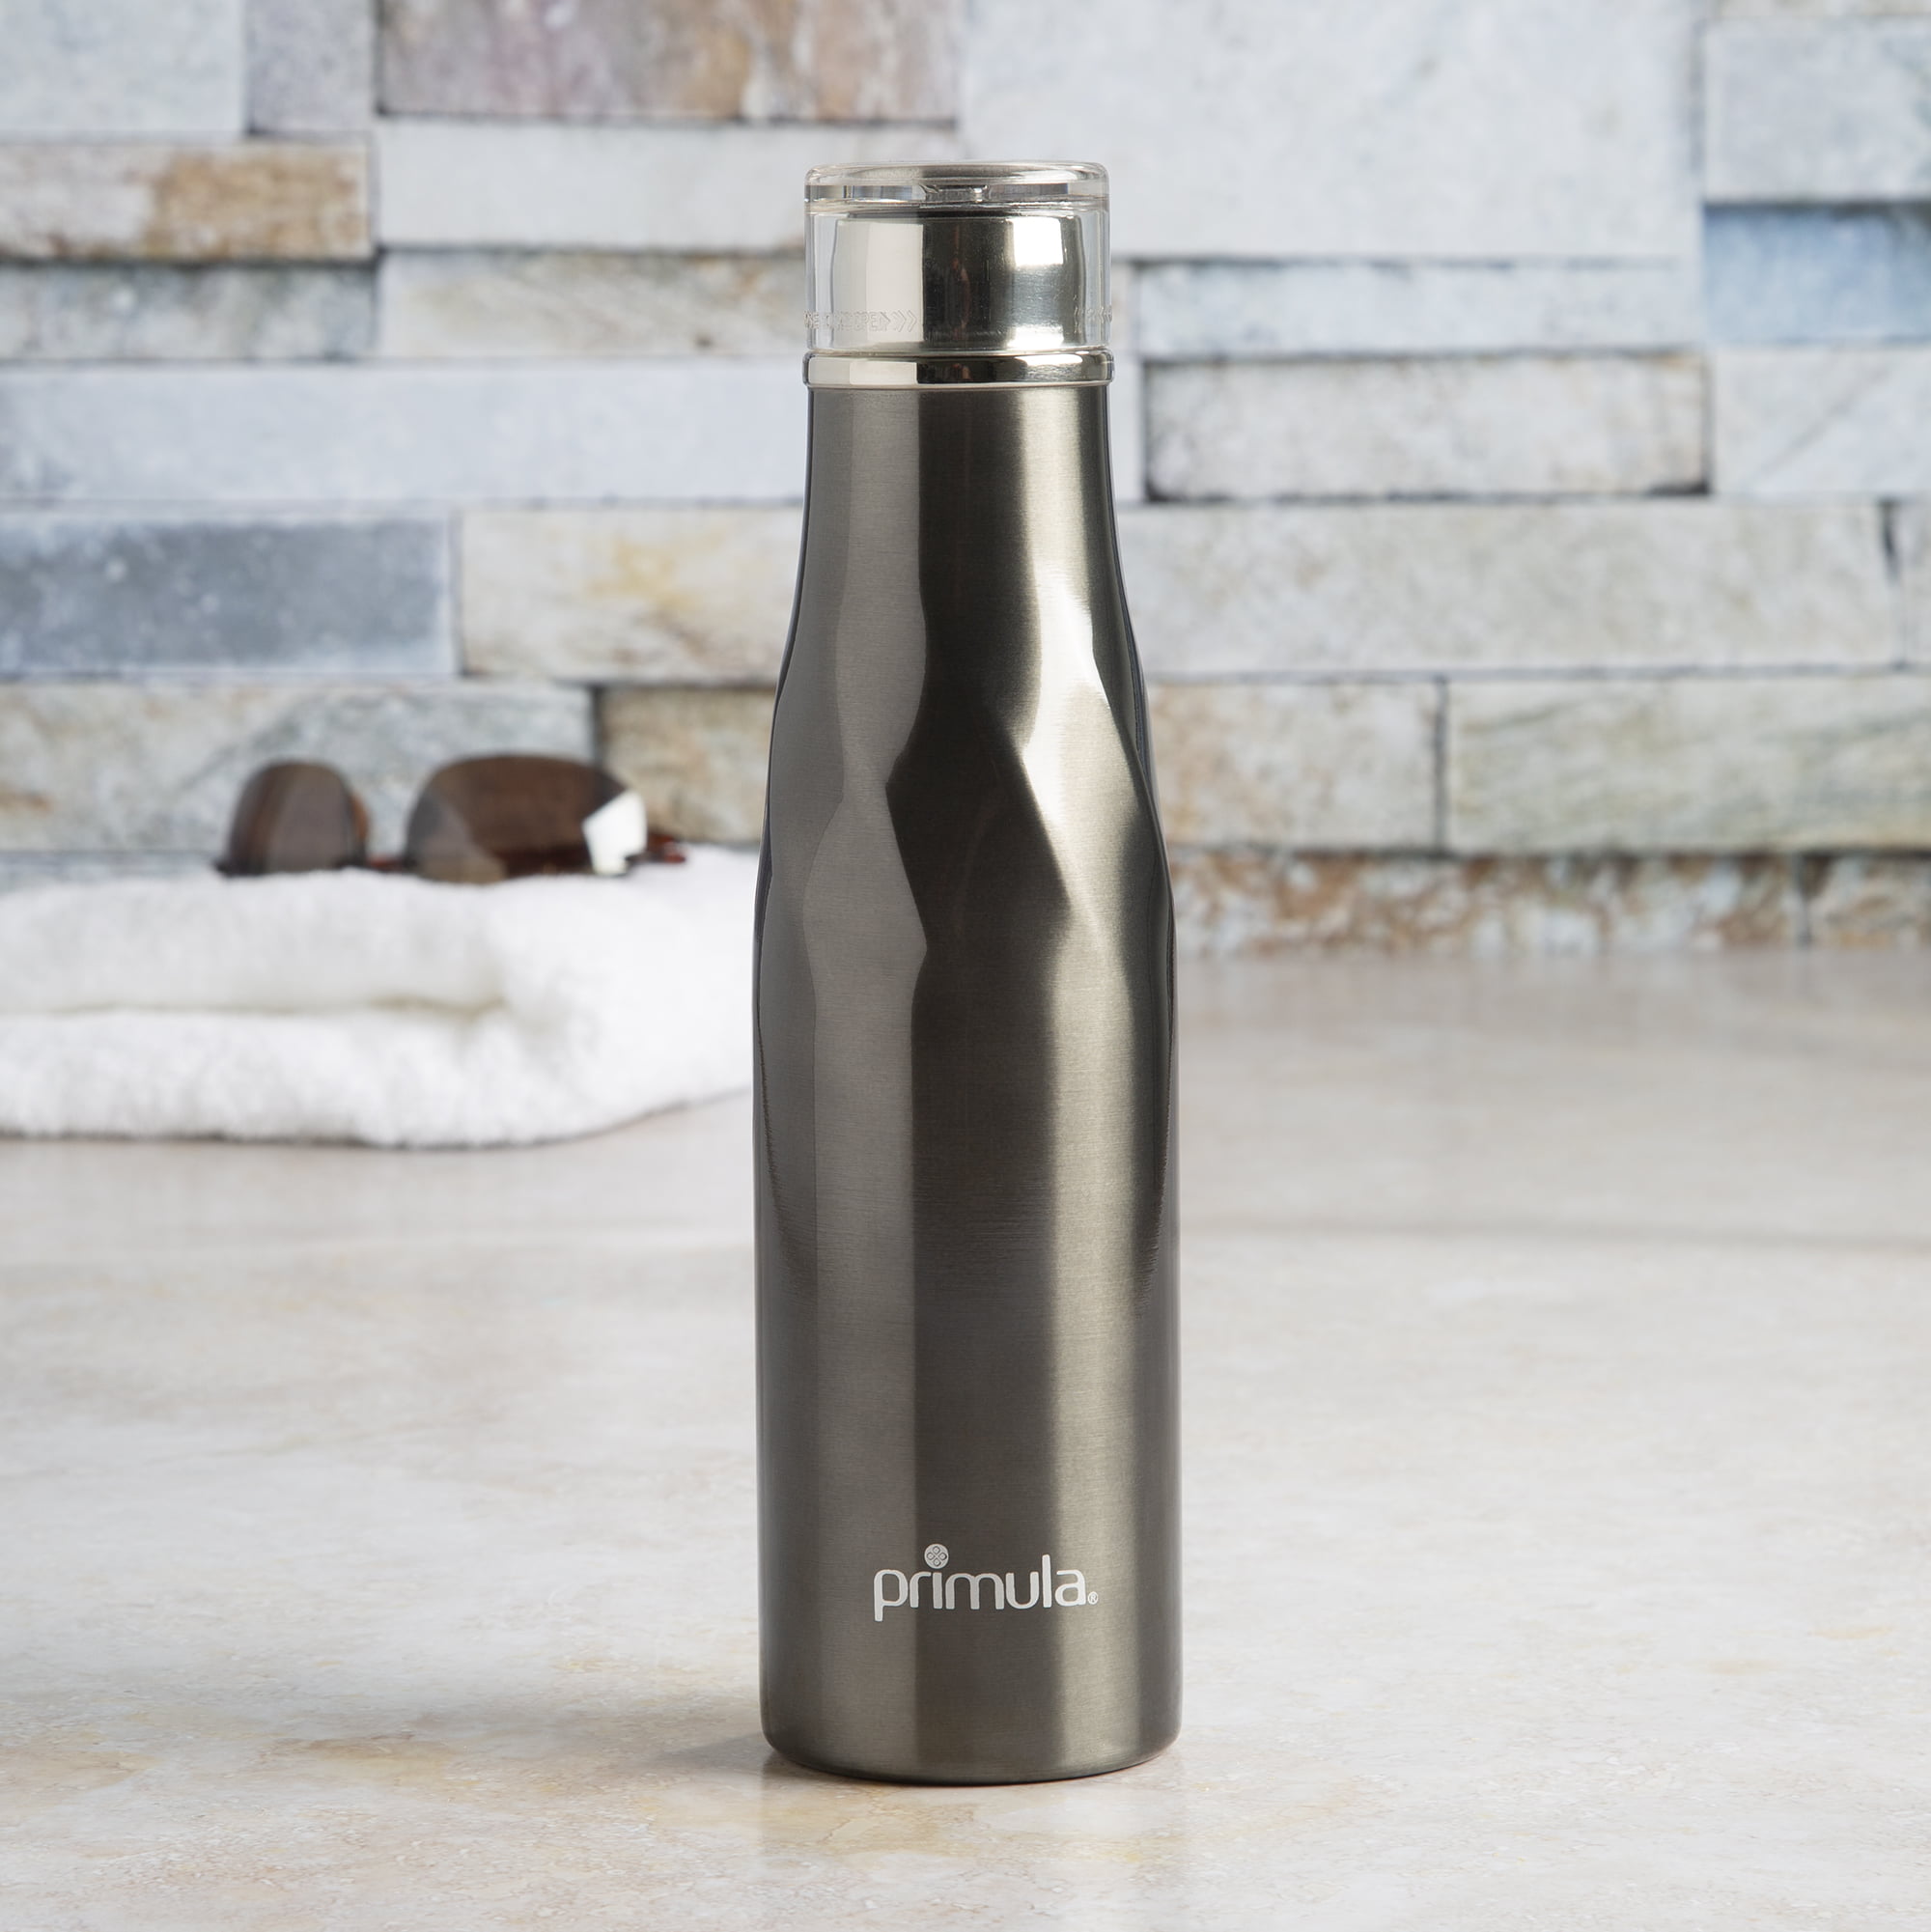 Primula Voyager Bottle, 12 oz, Stainless Steel Tumbler, Stainless Steel